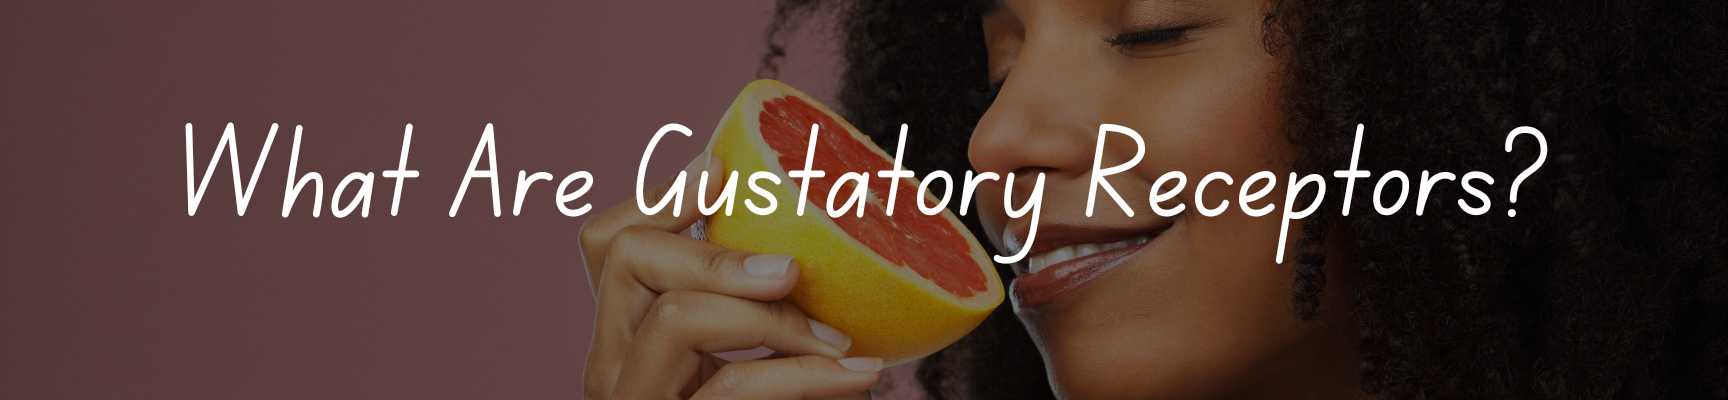 What Are Gustatory Receptors?